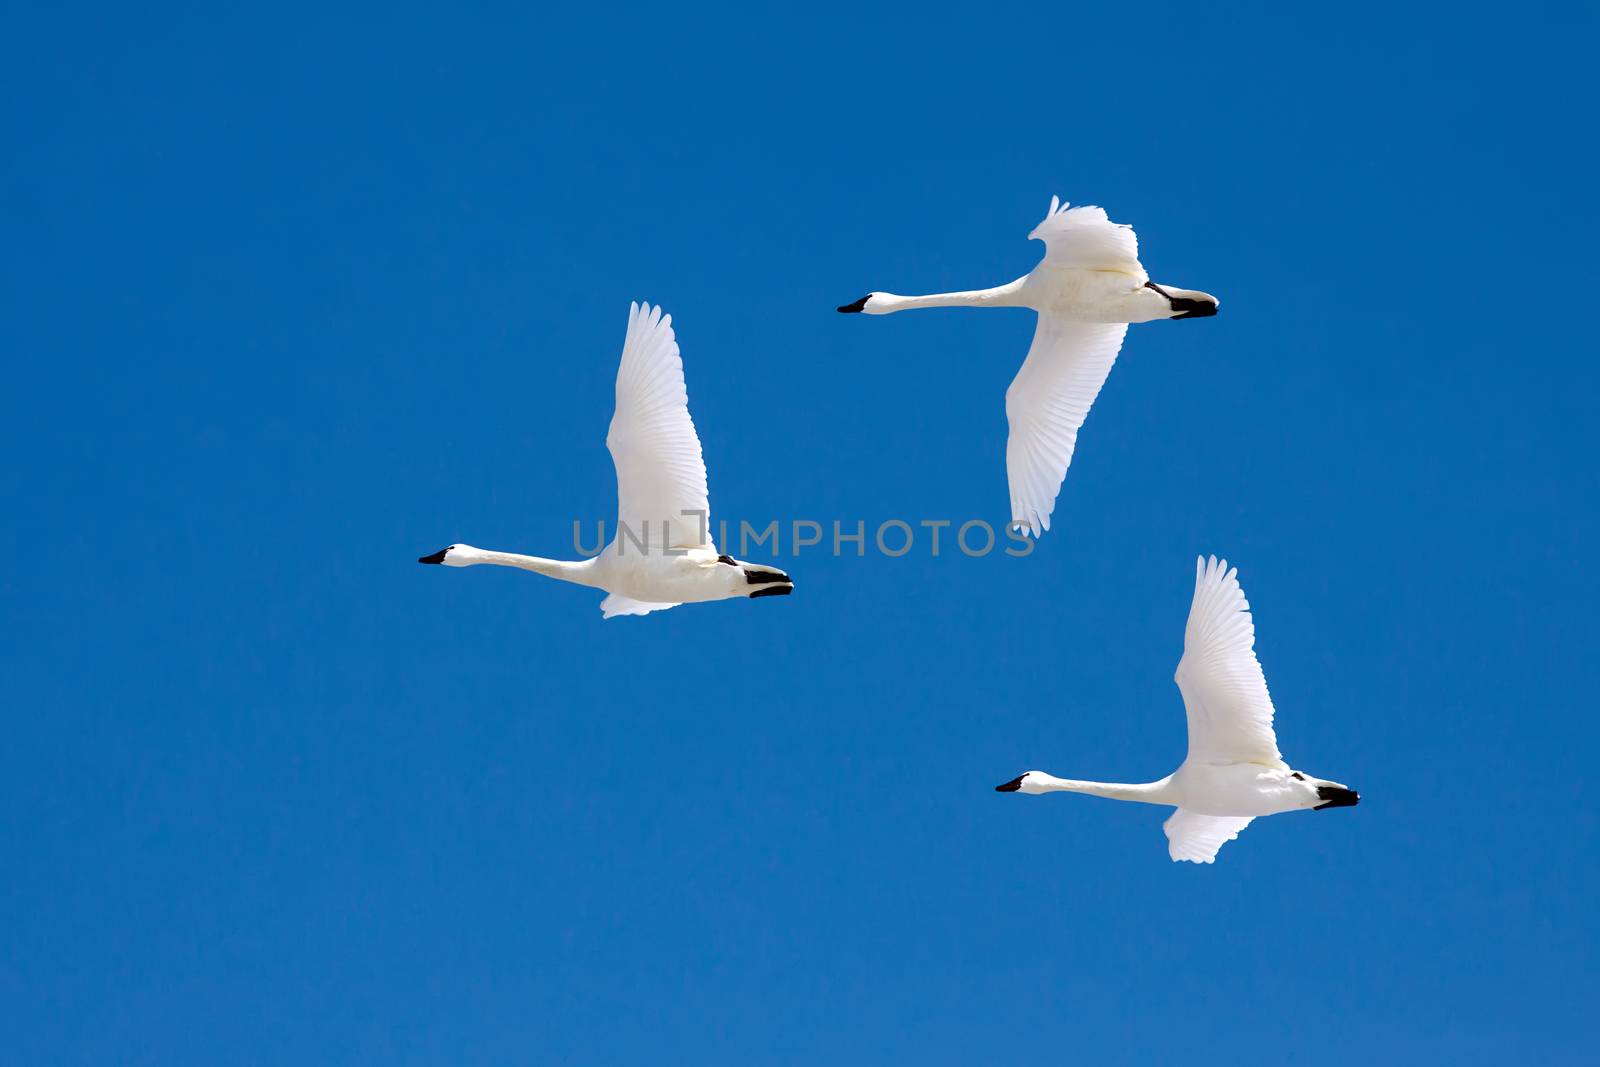  Tundra Swans flying in a clear blue winter sky.